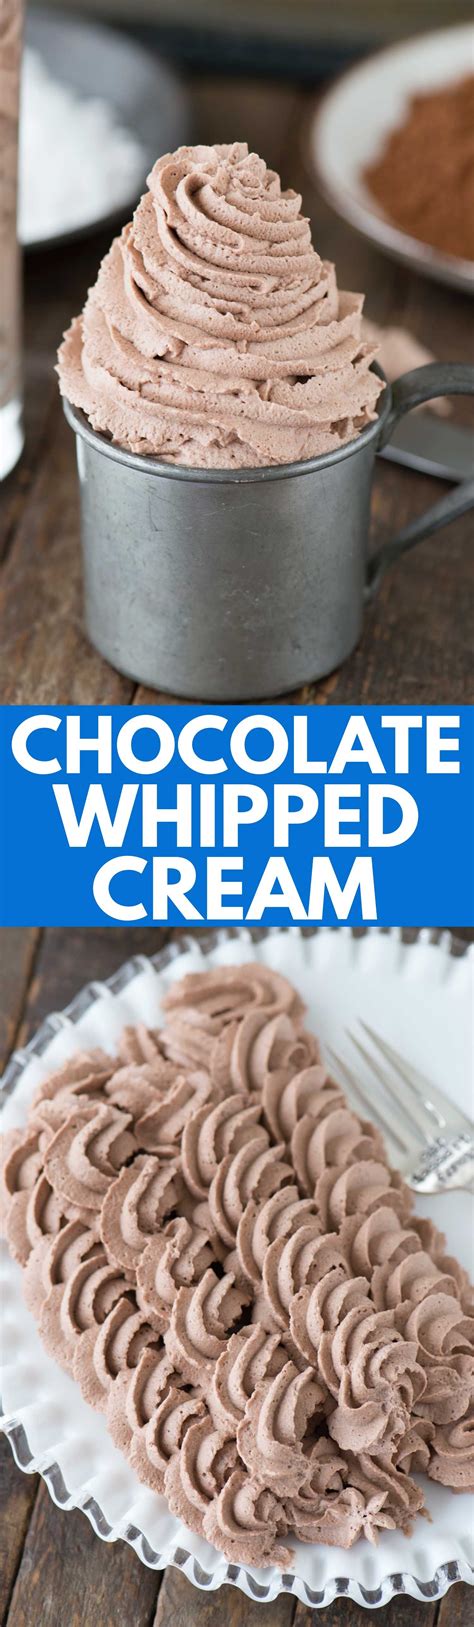 Reduce to a simmer and stir in chocolate chips. Learn how to make the easiest homemade chocolate whipped cream with only 3 ingredients ...